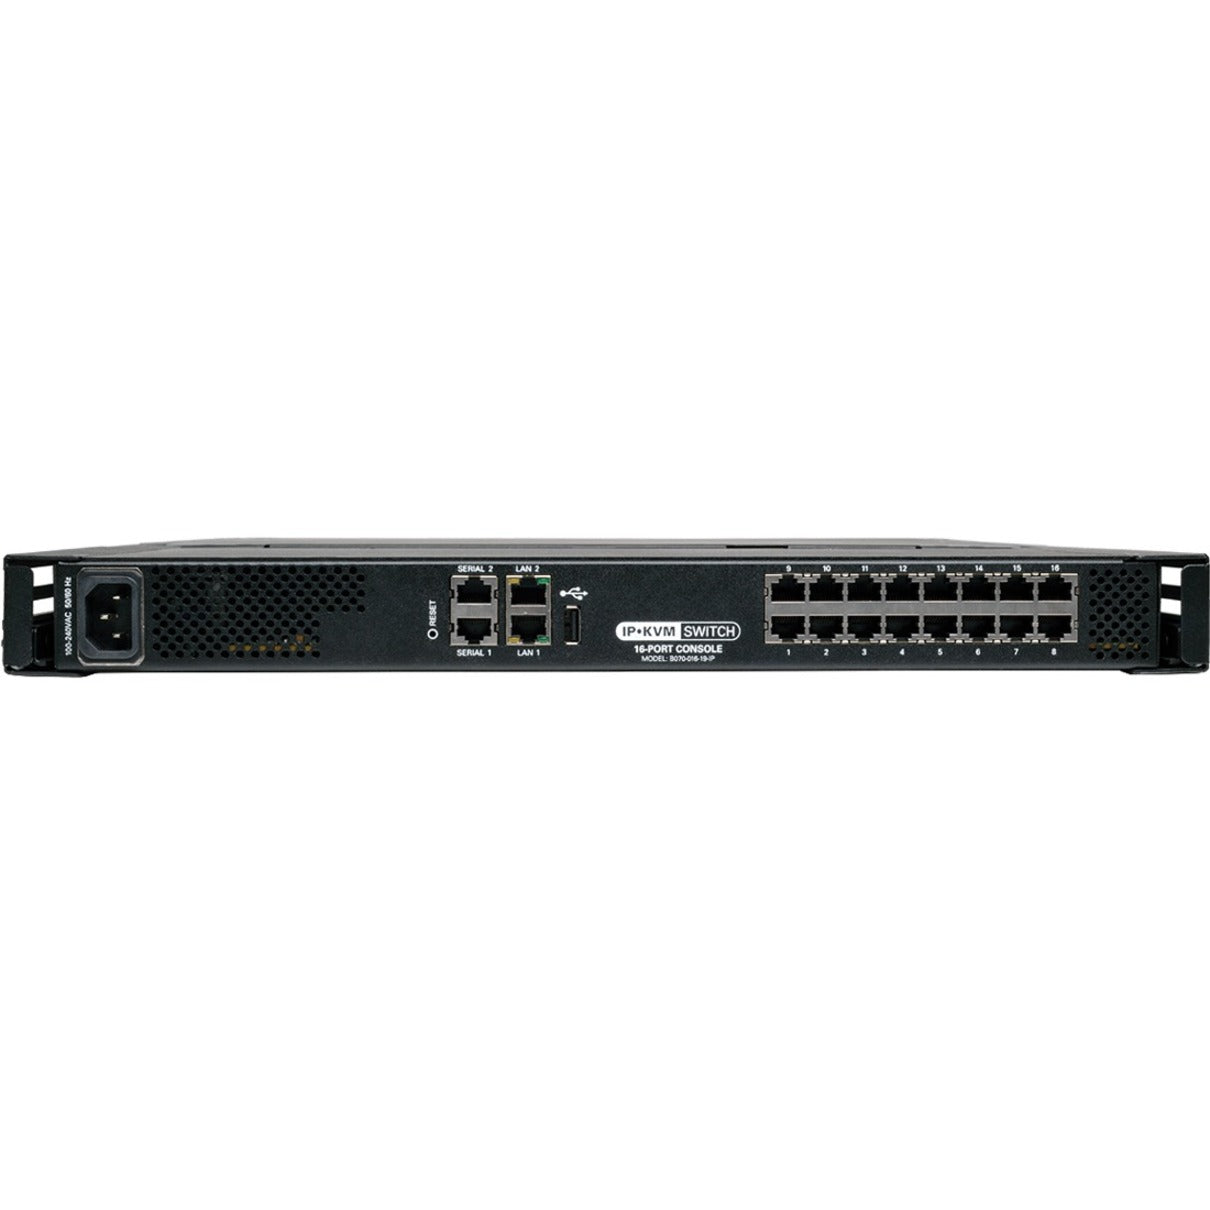 Tripp Lite B070-016-19-IP NetCommander 16-Port Cat5 IP KVM Switch with 19" Monitor, Keyboard, and Mouse